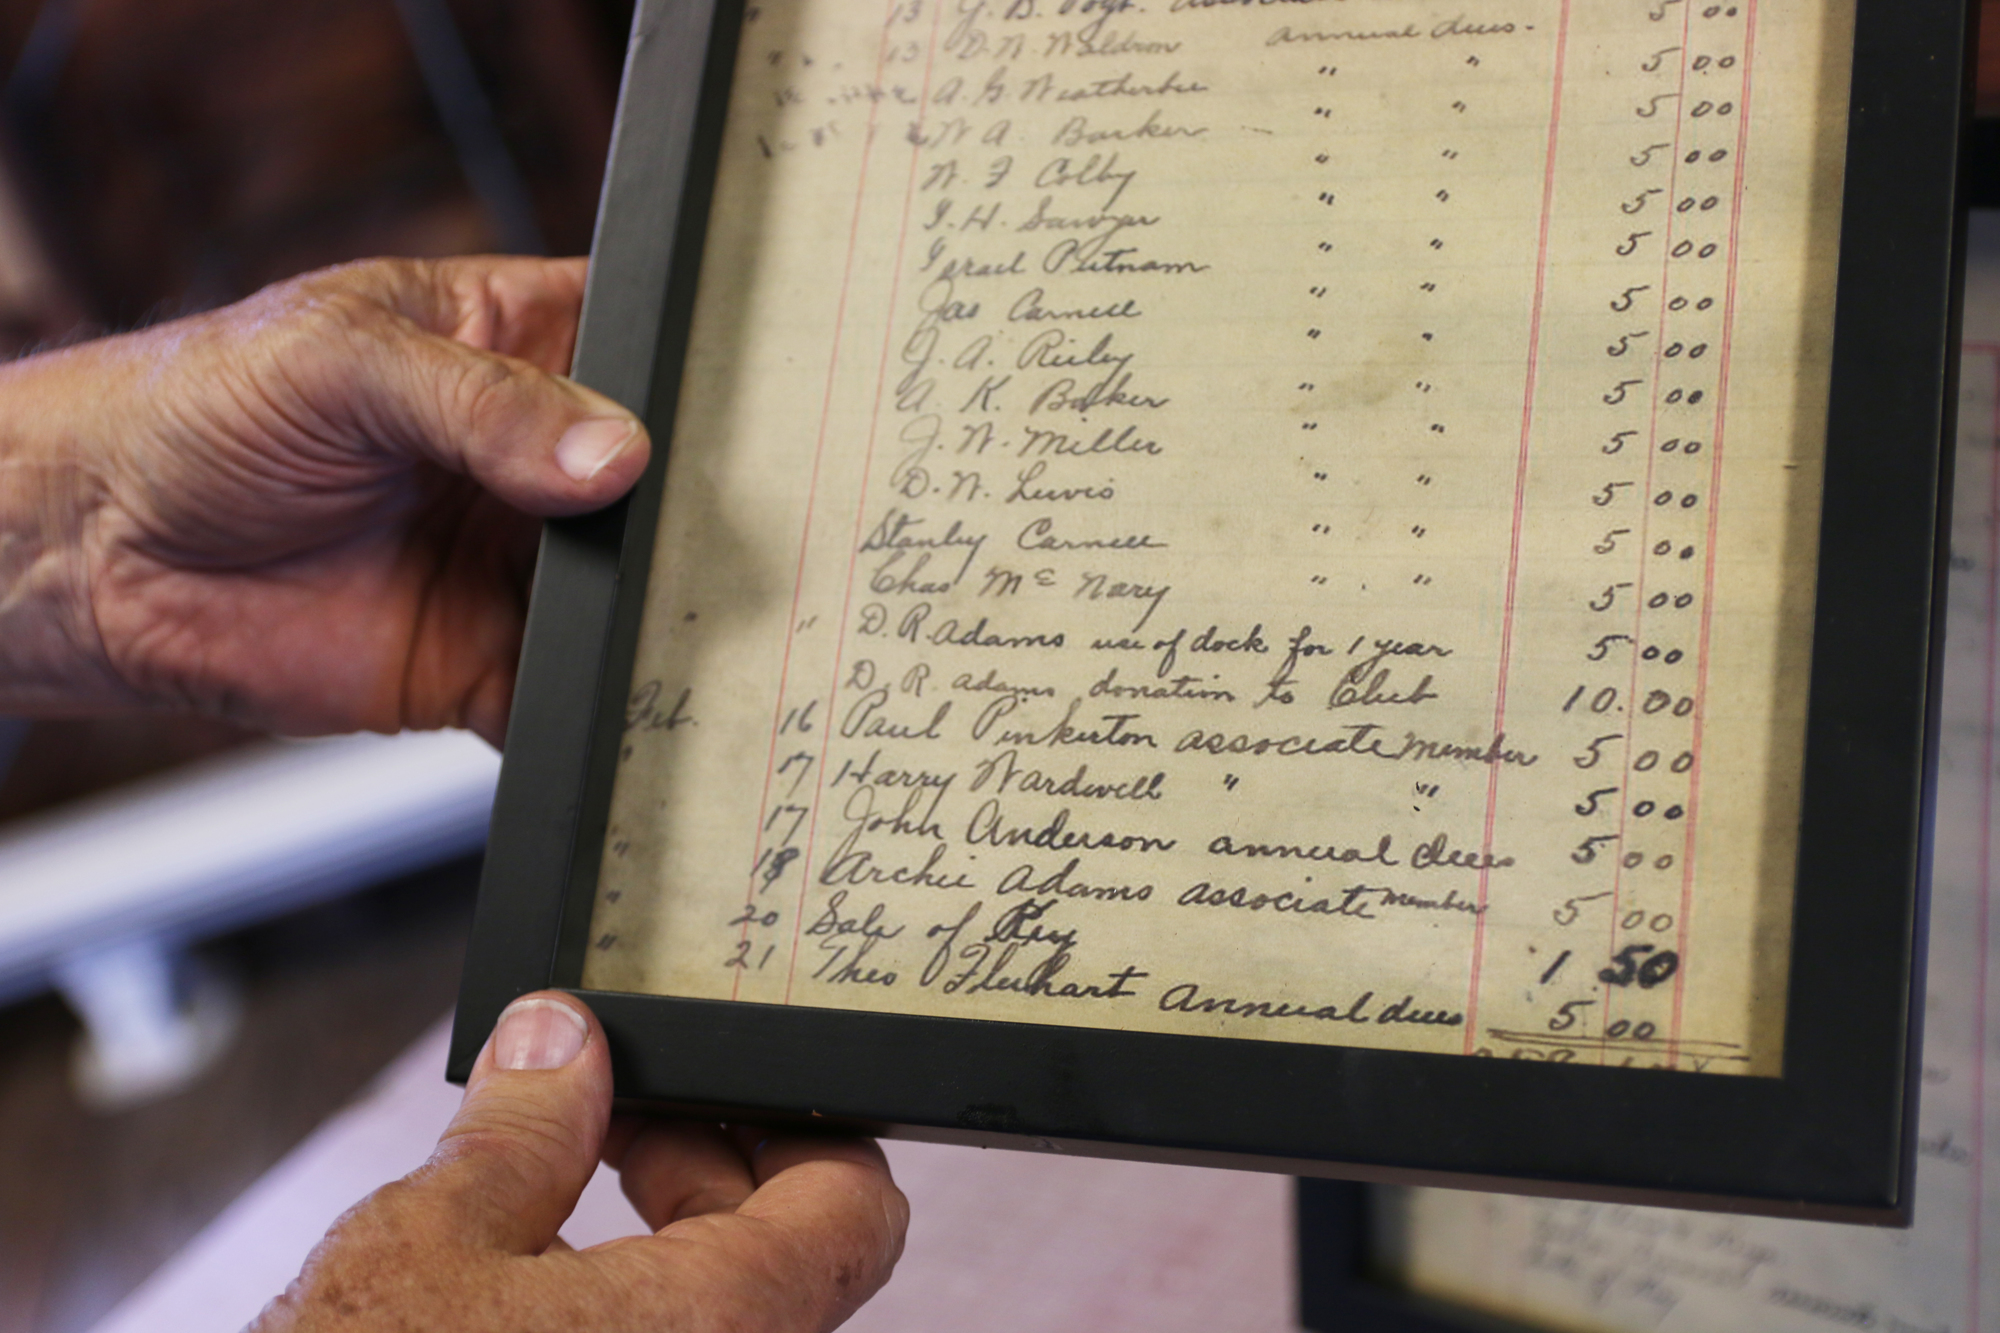 A 1911 roster shows John Anderson paid $5 for his membership. Photo by Jarleene Almenas